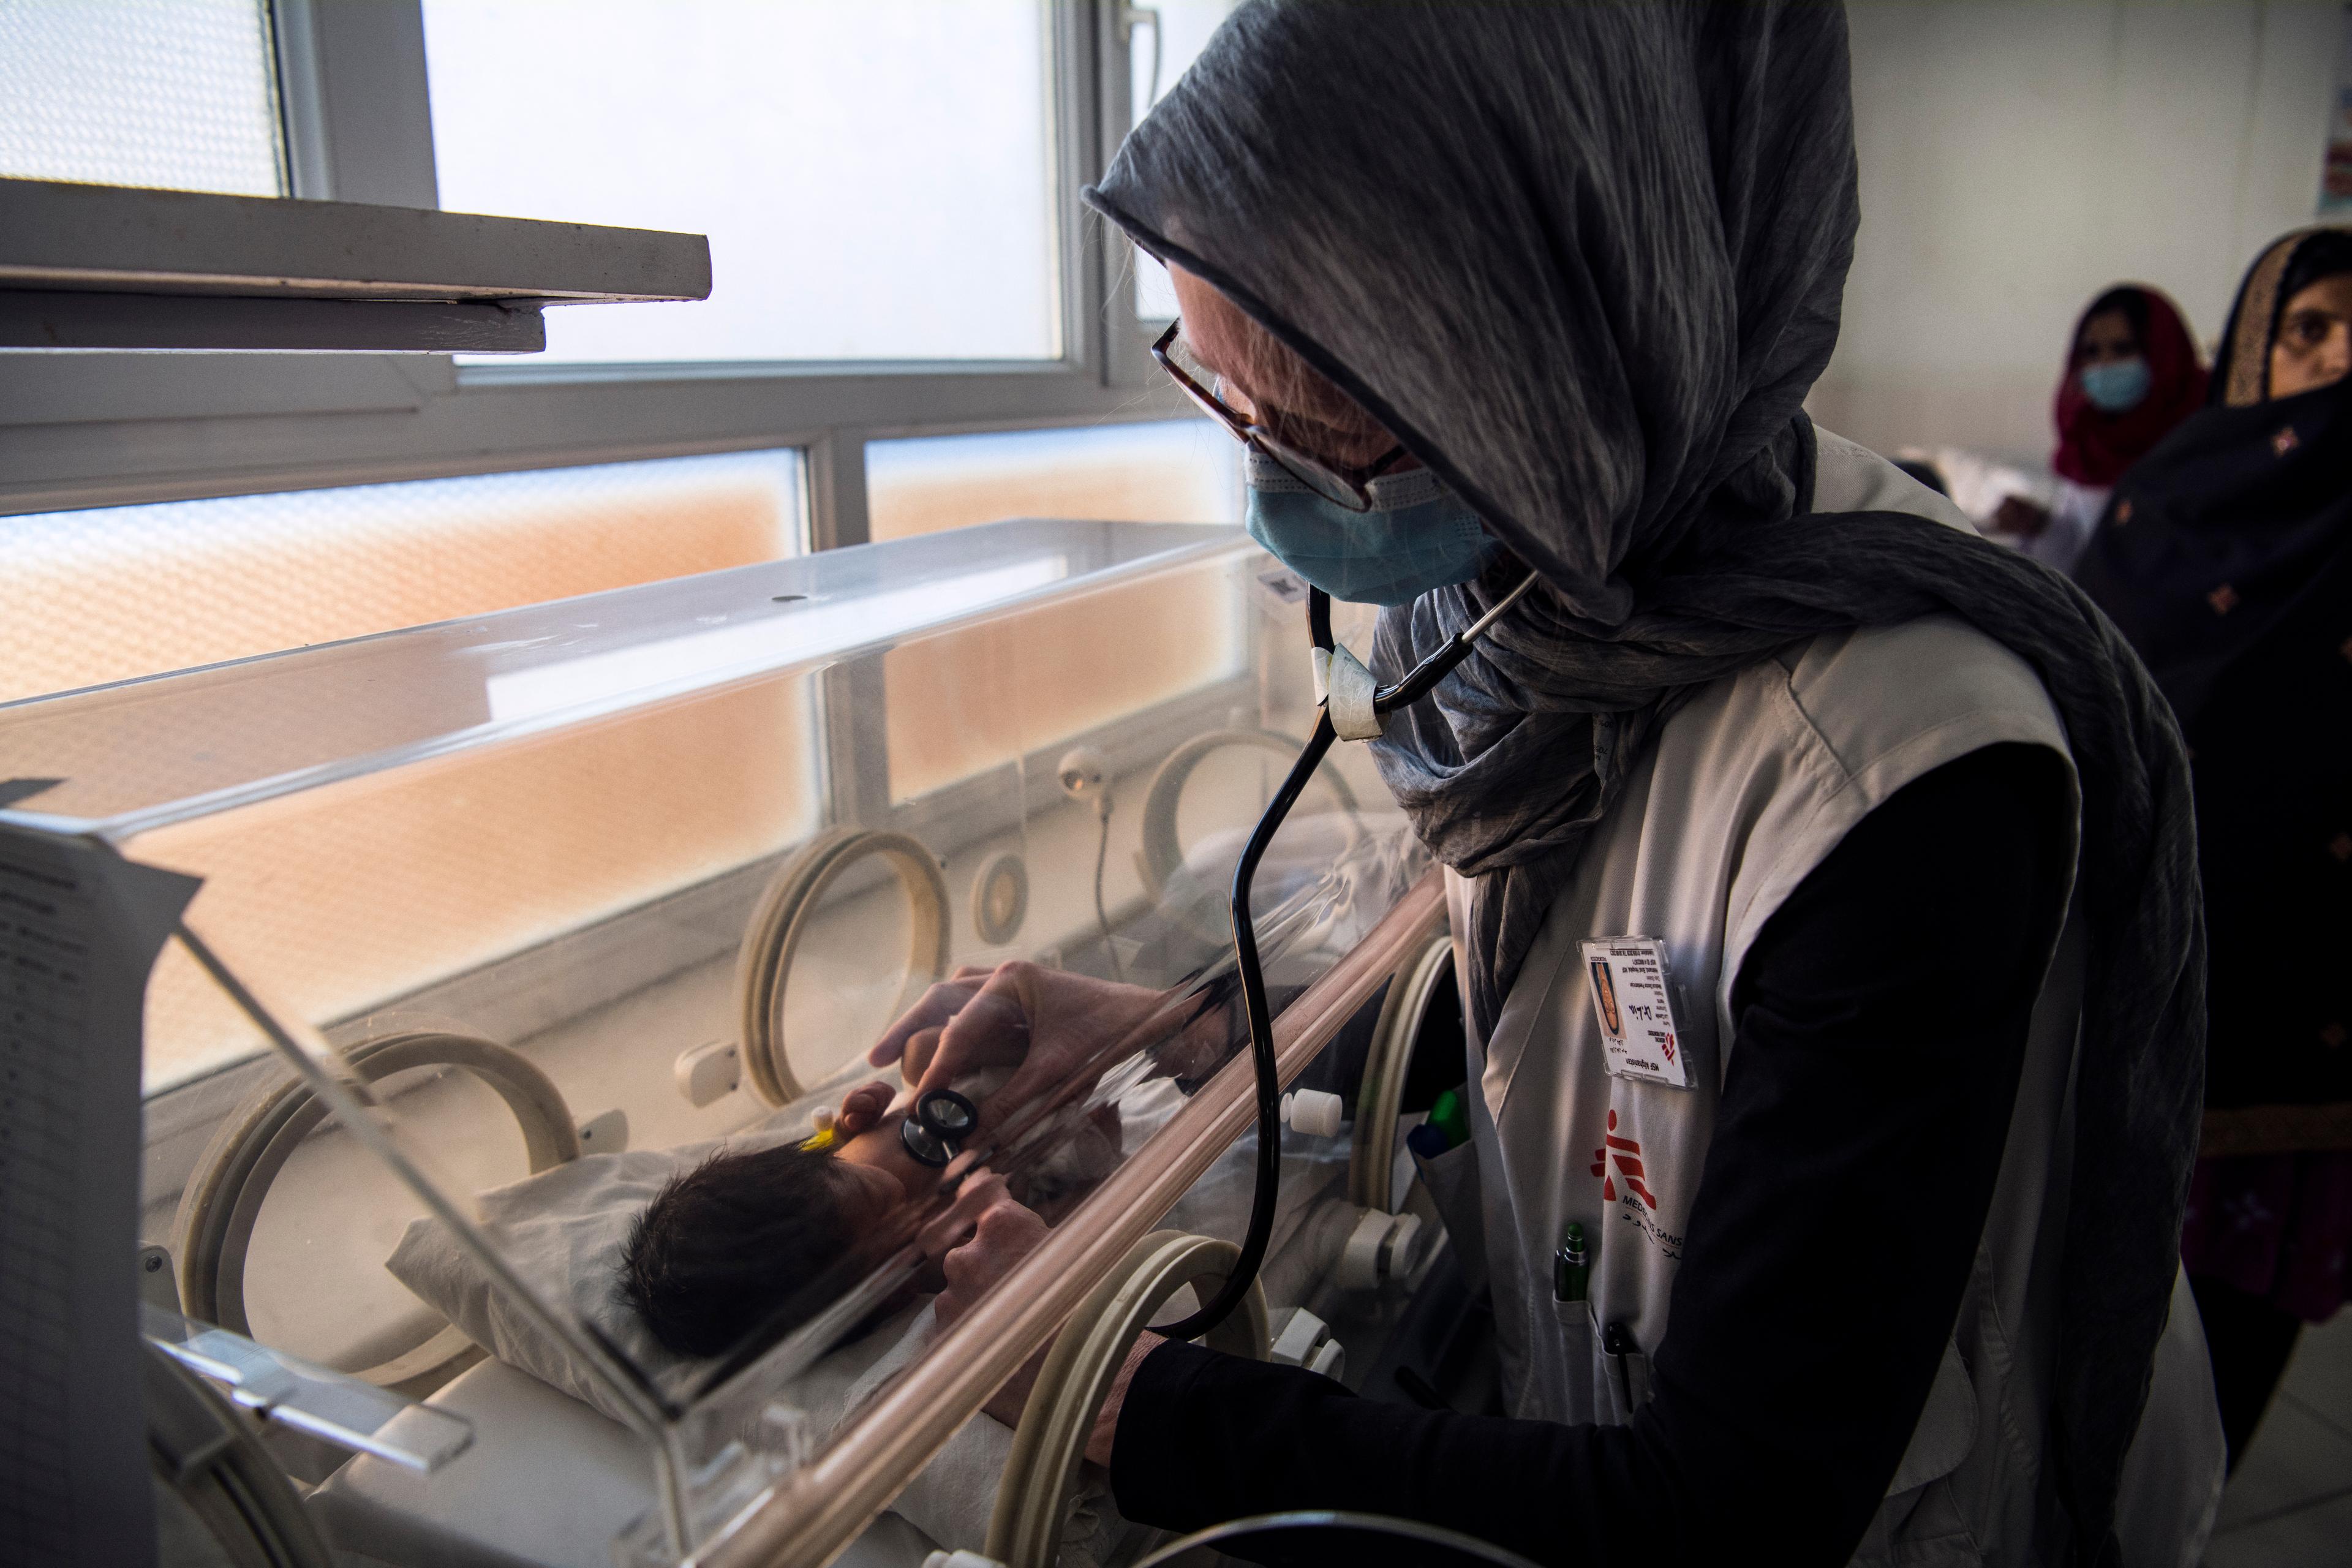 Dr Lia, a paediatrician, examines a baby in the neonatal intensive care unit of Boost Hospital, the main provincial hospital in Helmand, located in the capital Lashkar Gah. 